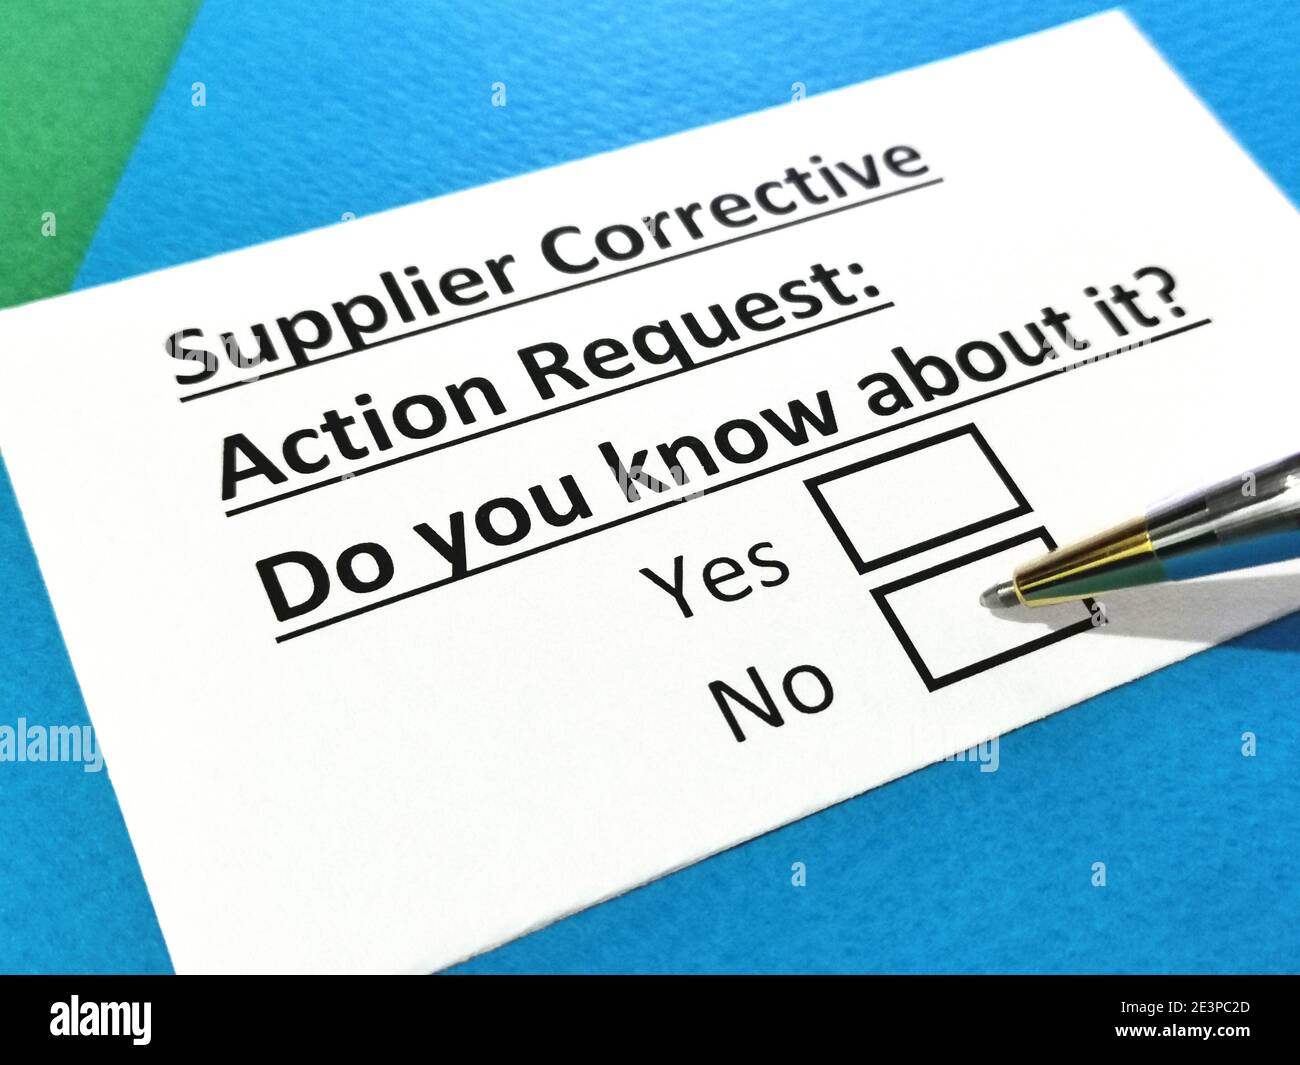 One person is answering question about supplier corrective action request. Stock Photo